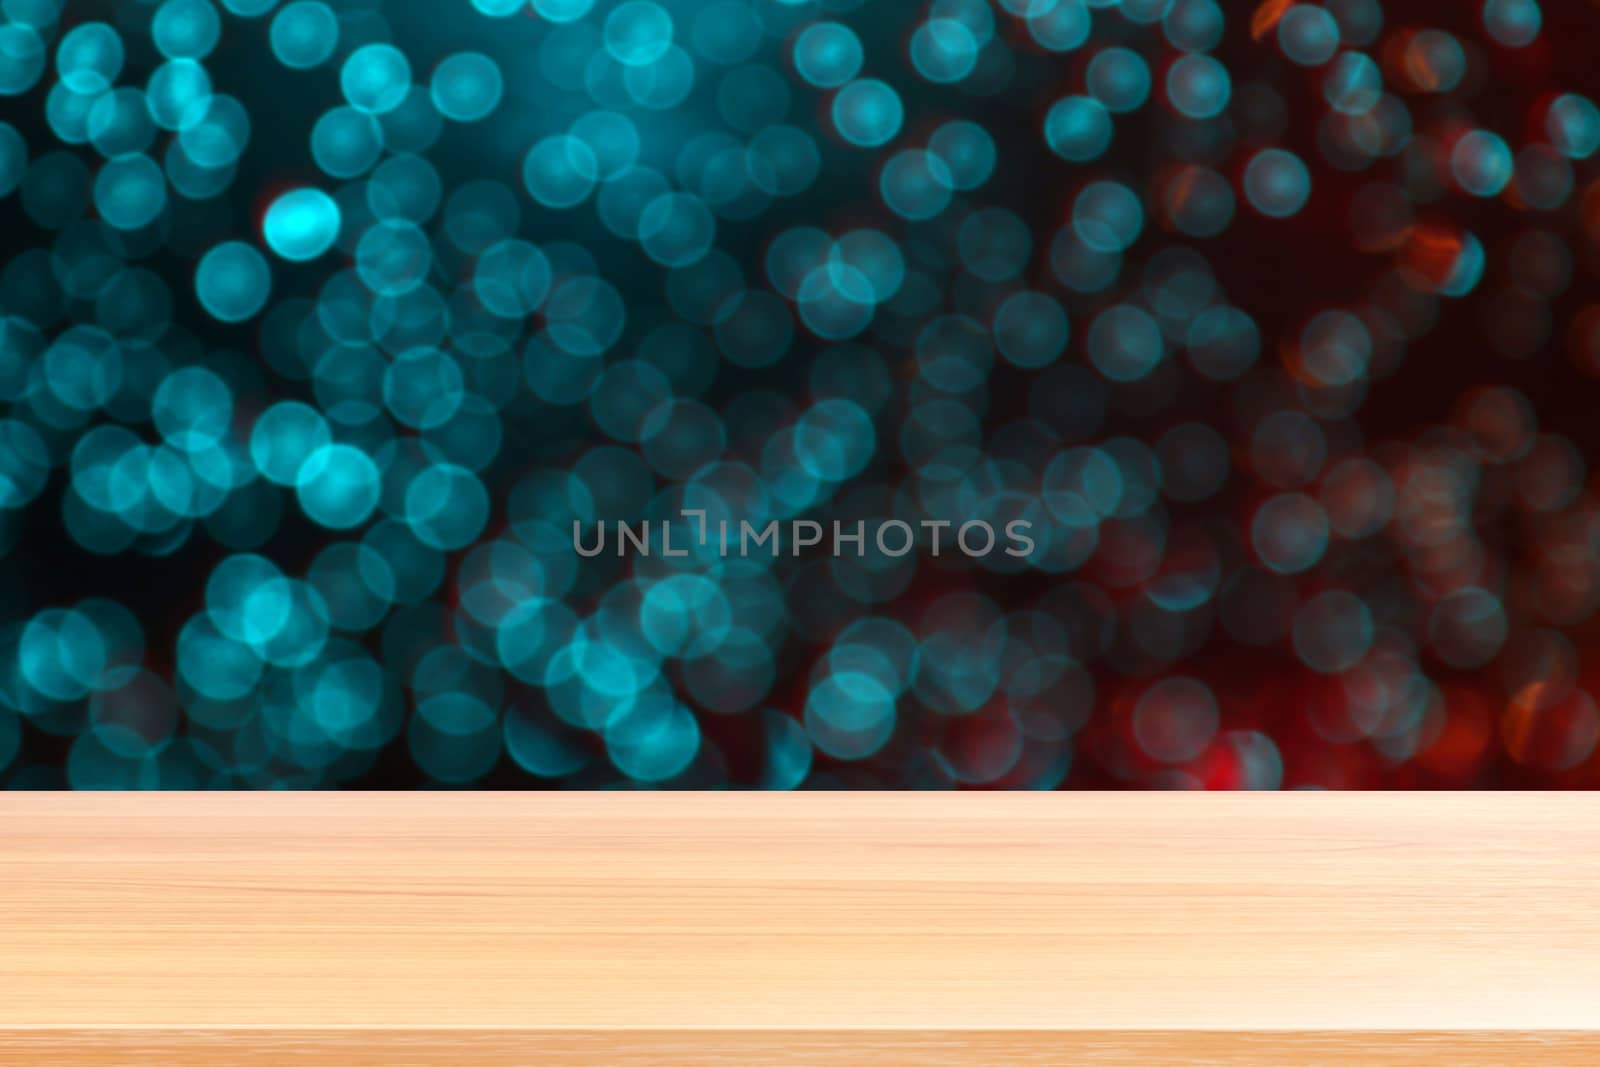 wood plank on abstract blurred blue red silver glittering shine bulbs lights background, empty wood table floors on Bokeh Blur dot light xmas, wood table board empty front sparkle circle lit display